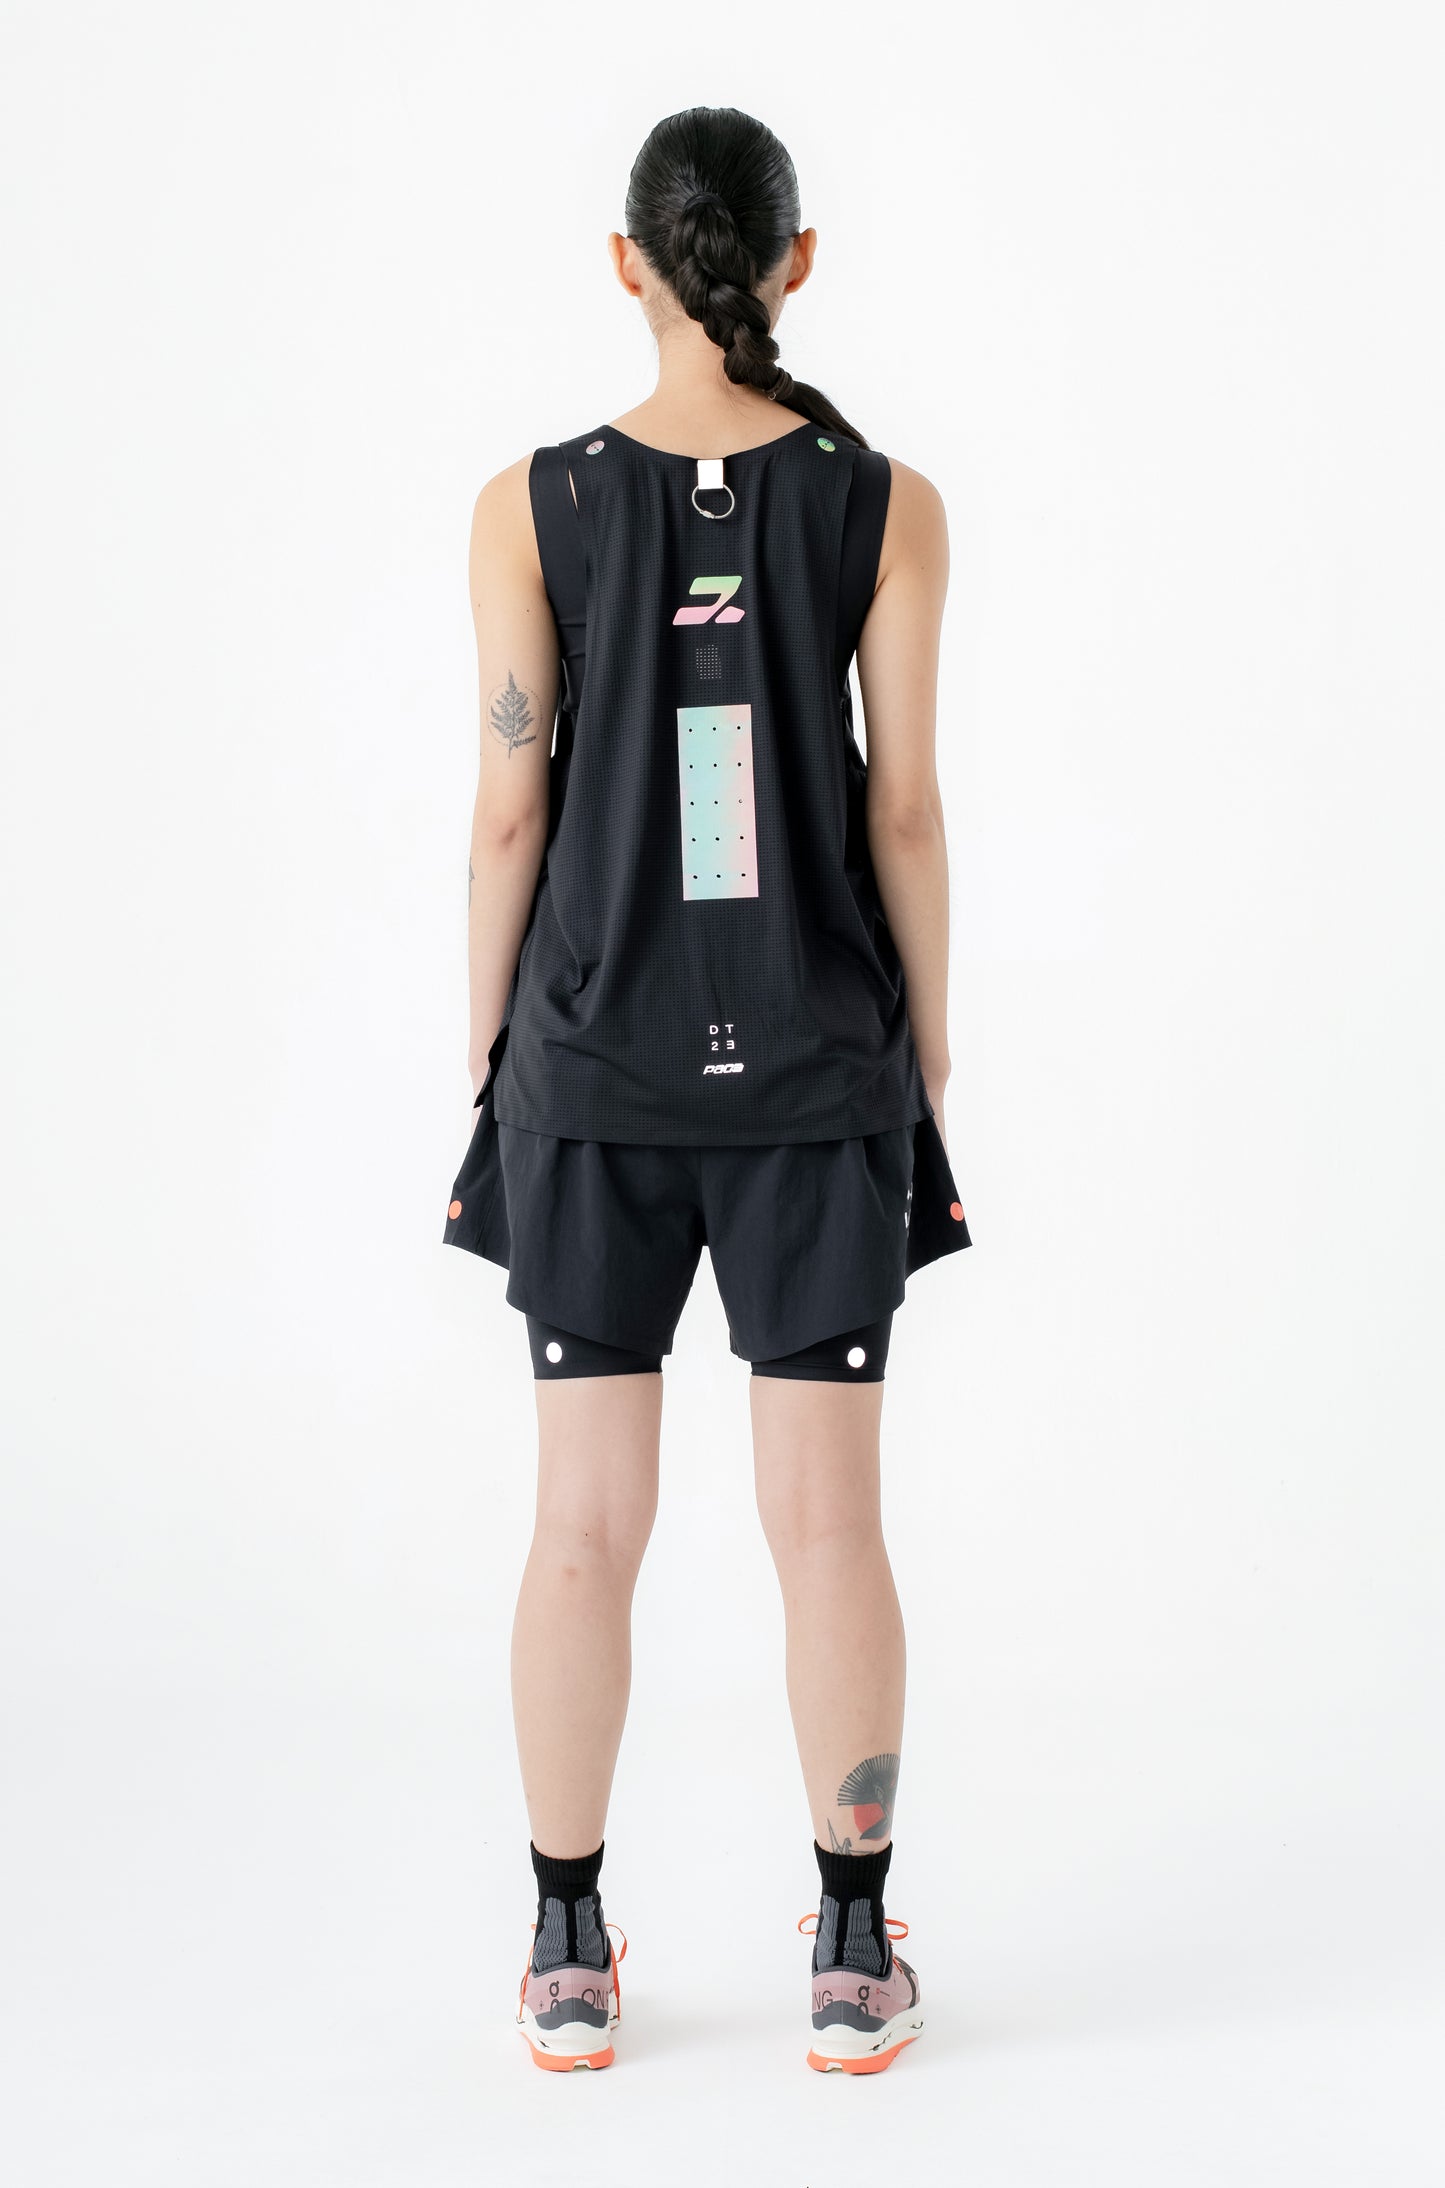 PACE - DT2 Double Layers Spots Shorts "Black" - THE GAME